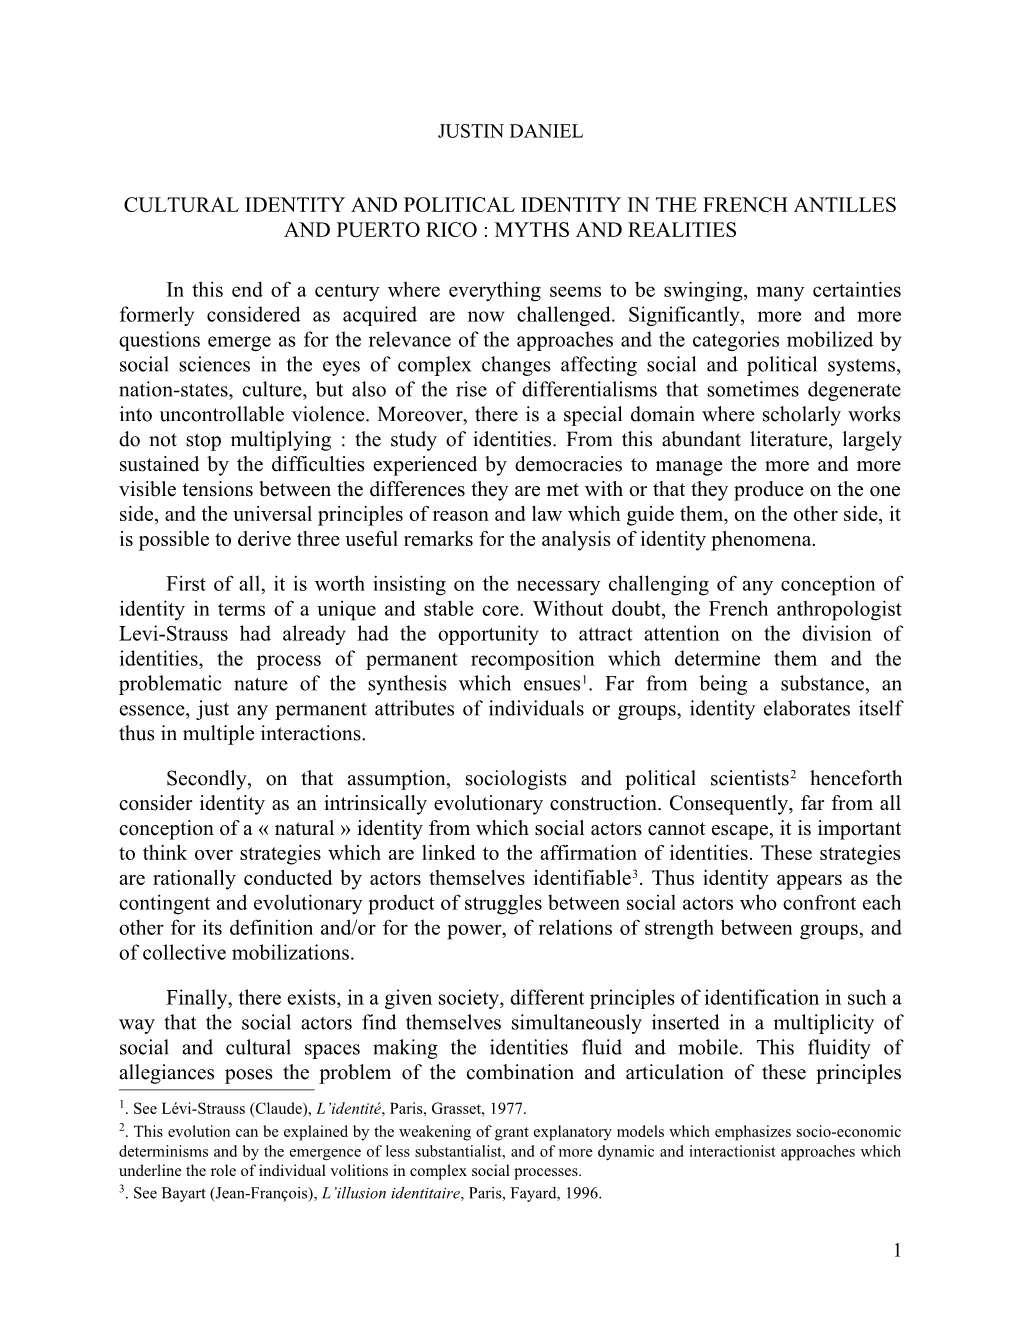 Cultural Identity and Political Identity in the French Antilles and Puerto Rico : Myths